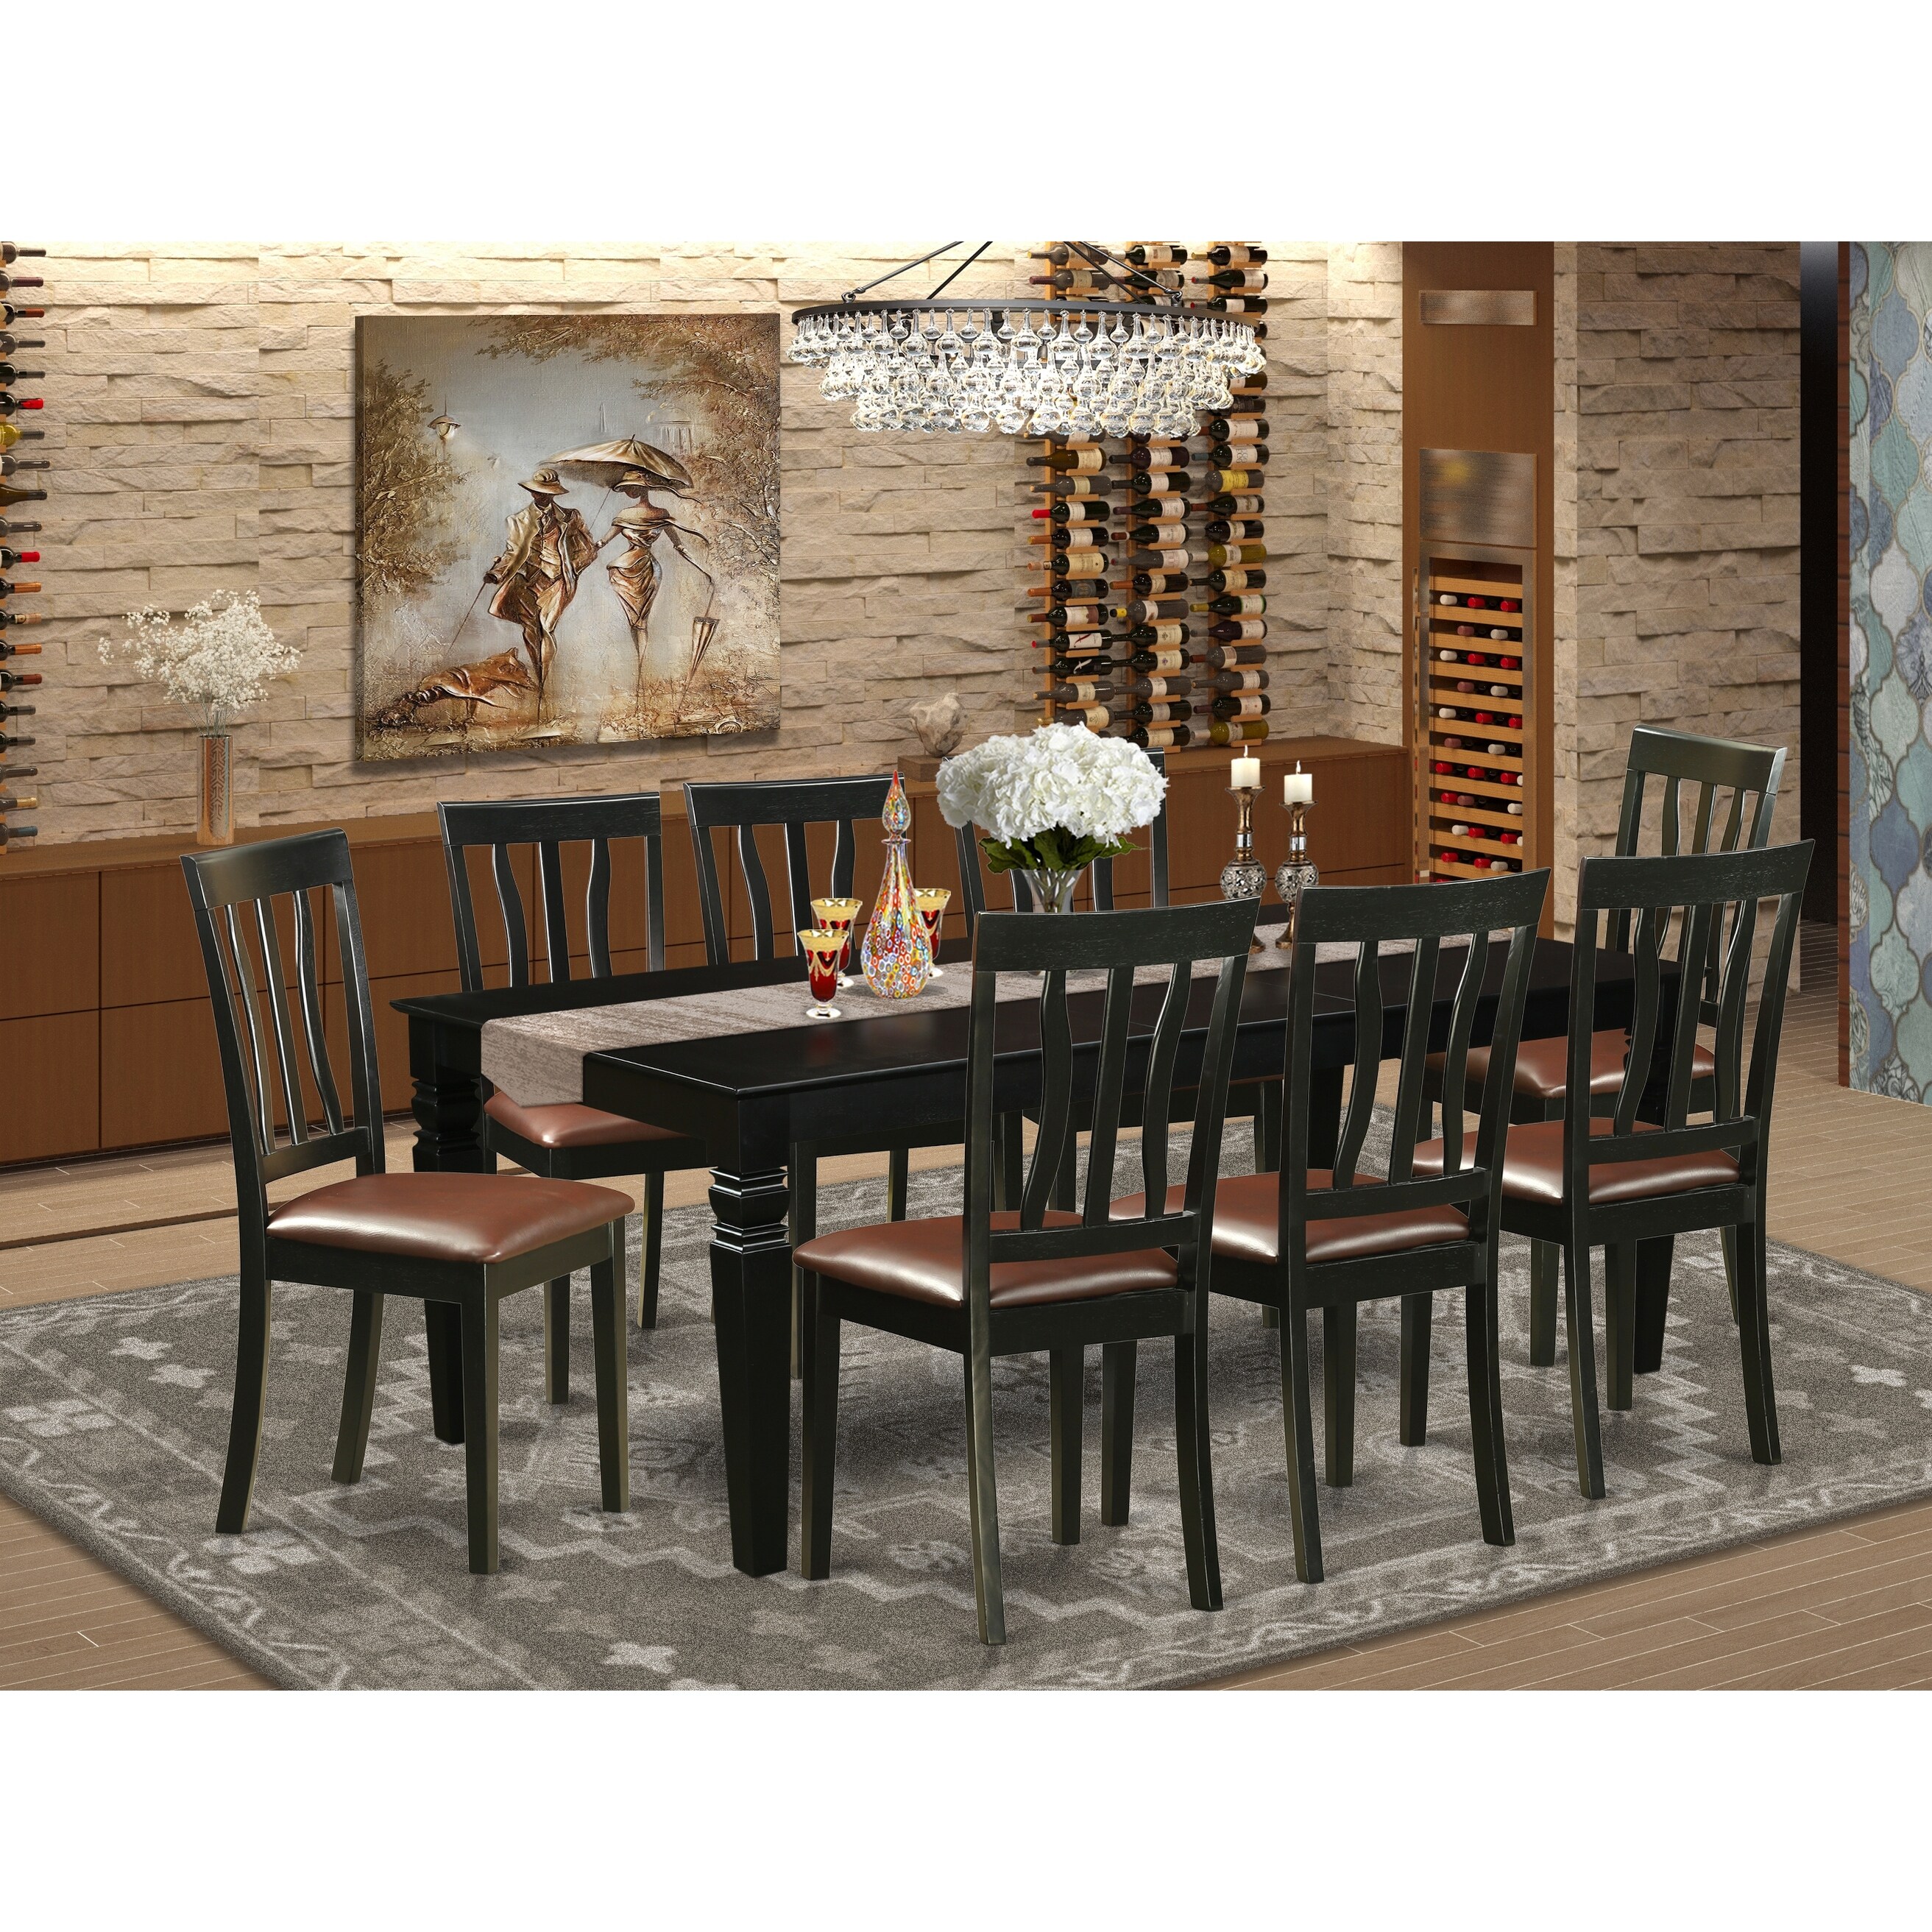 Lgan9 Blk 9 Pc Dining Room Set With A Table And 8 Chairs Overstock 17676470